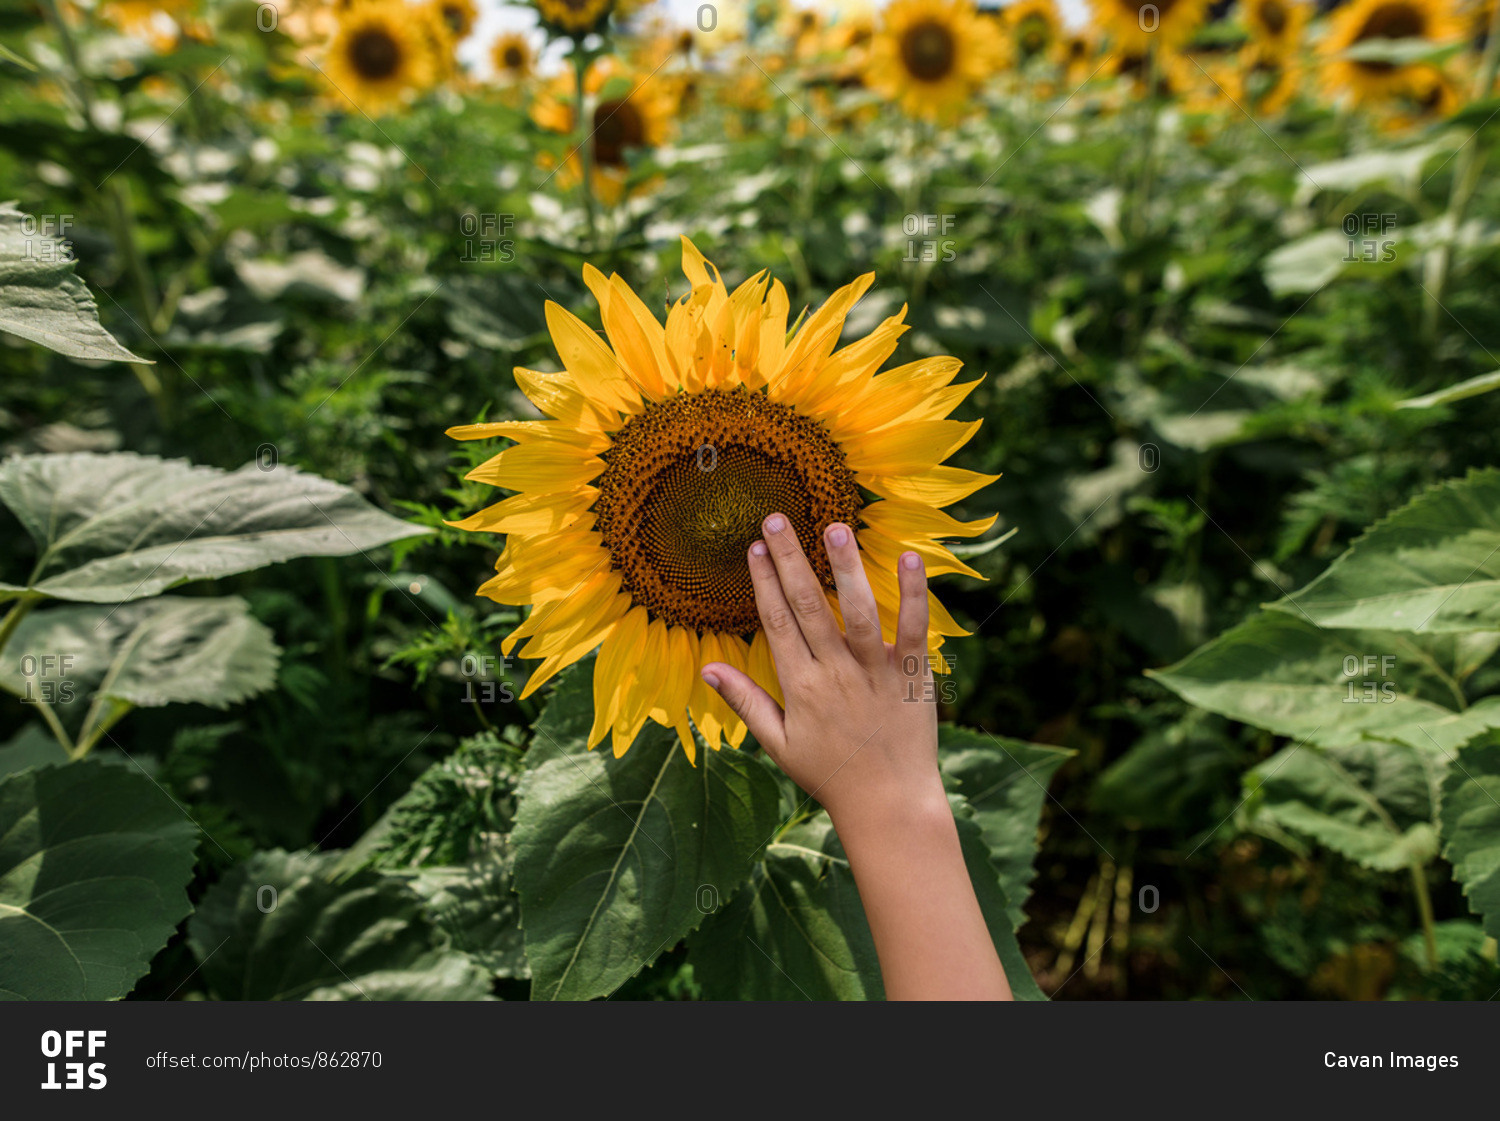 close up of a child's hand reaching up to touch a sunflower